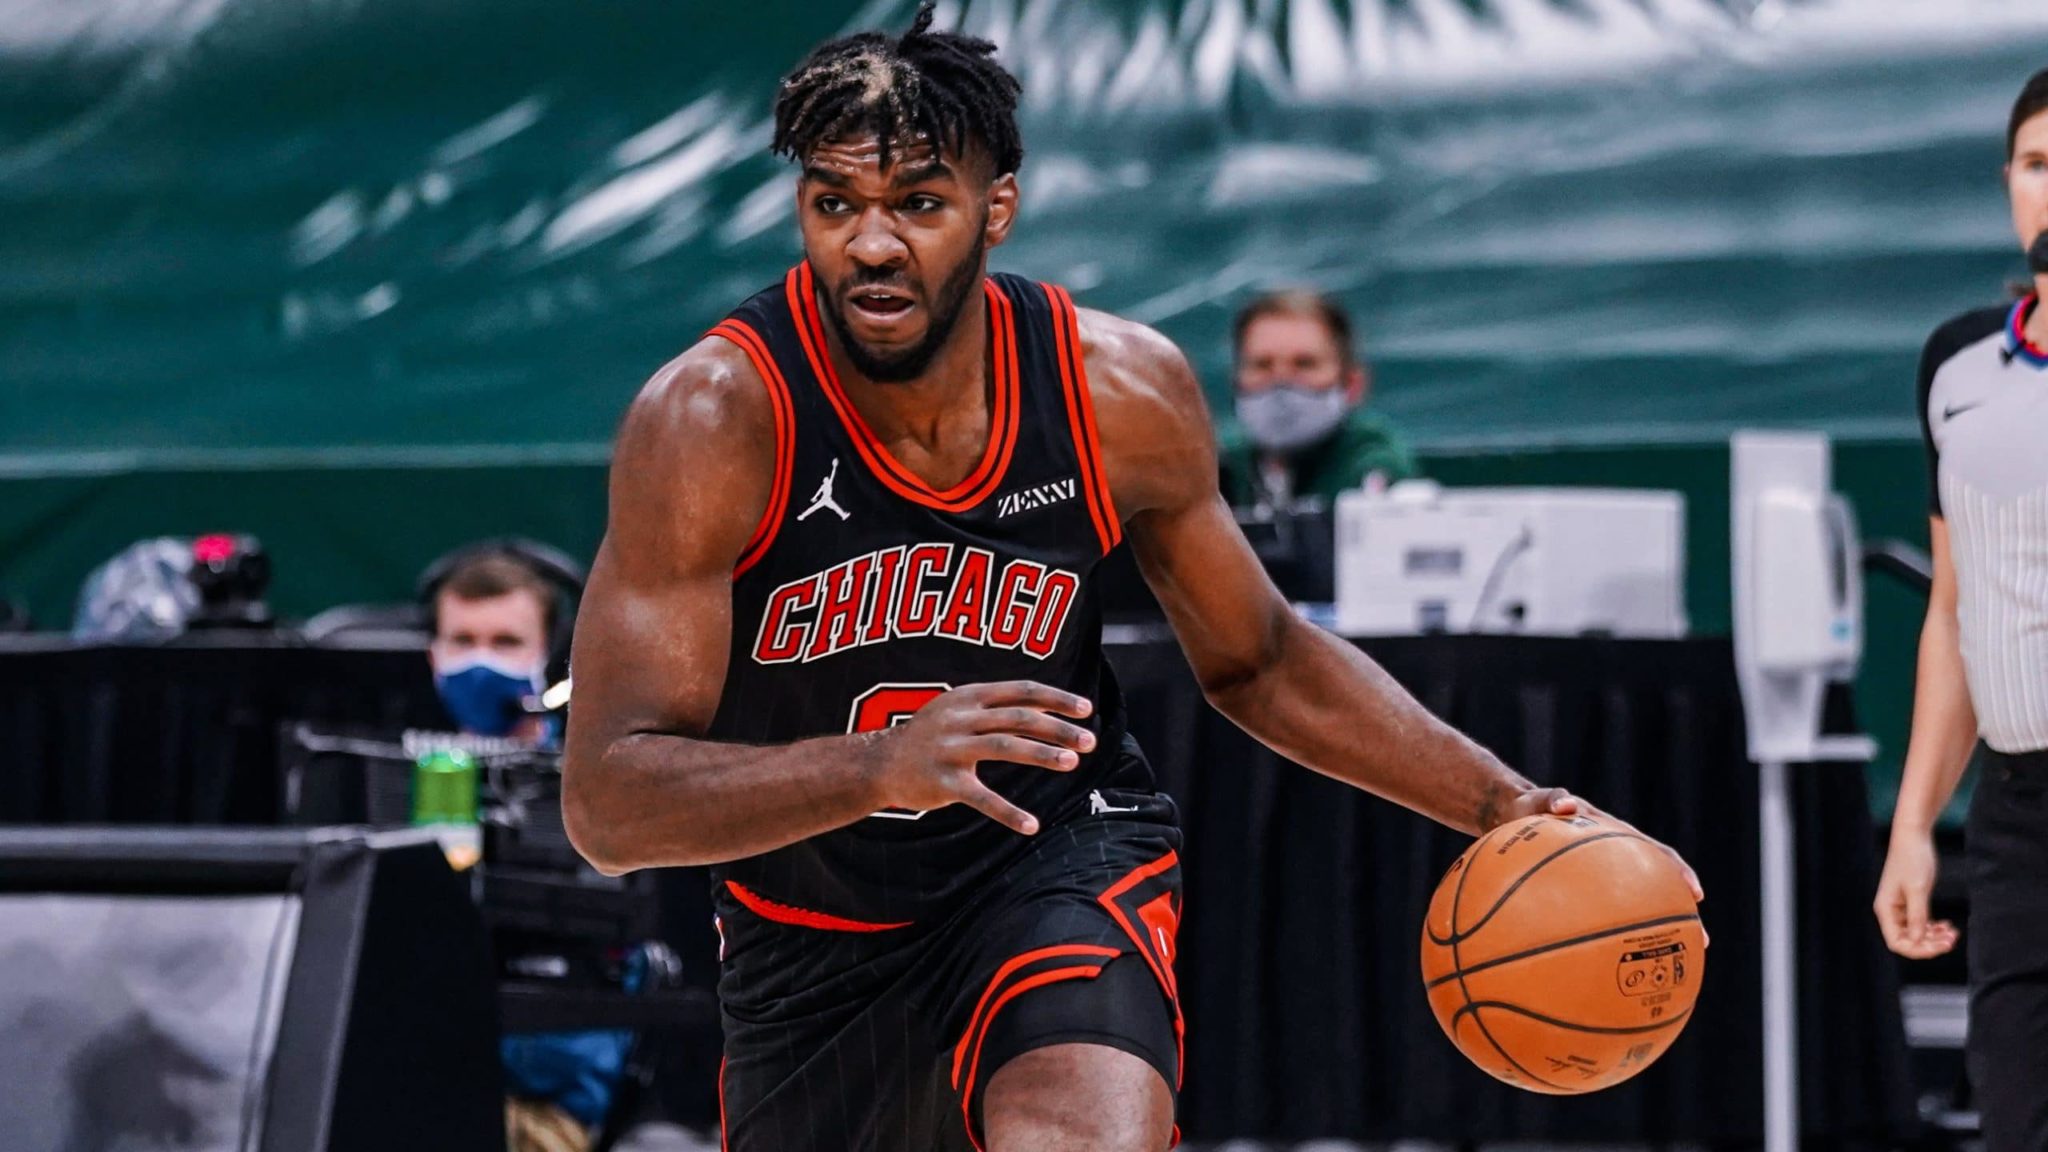 Bulls’ Patrick Williams Expected to Miss Rest of Regular Season With Wrist Injury